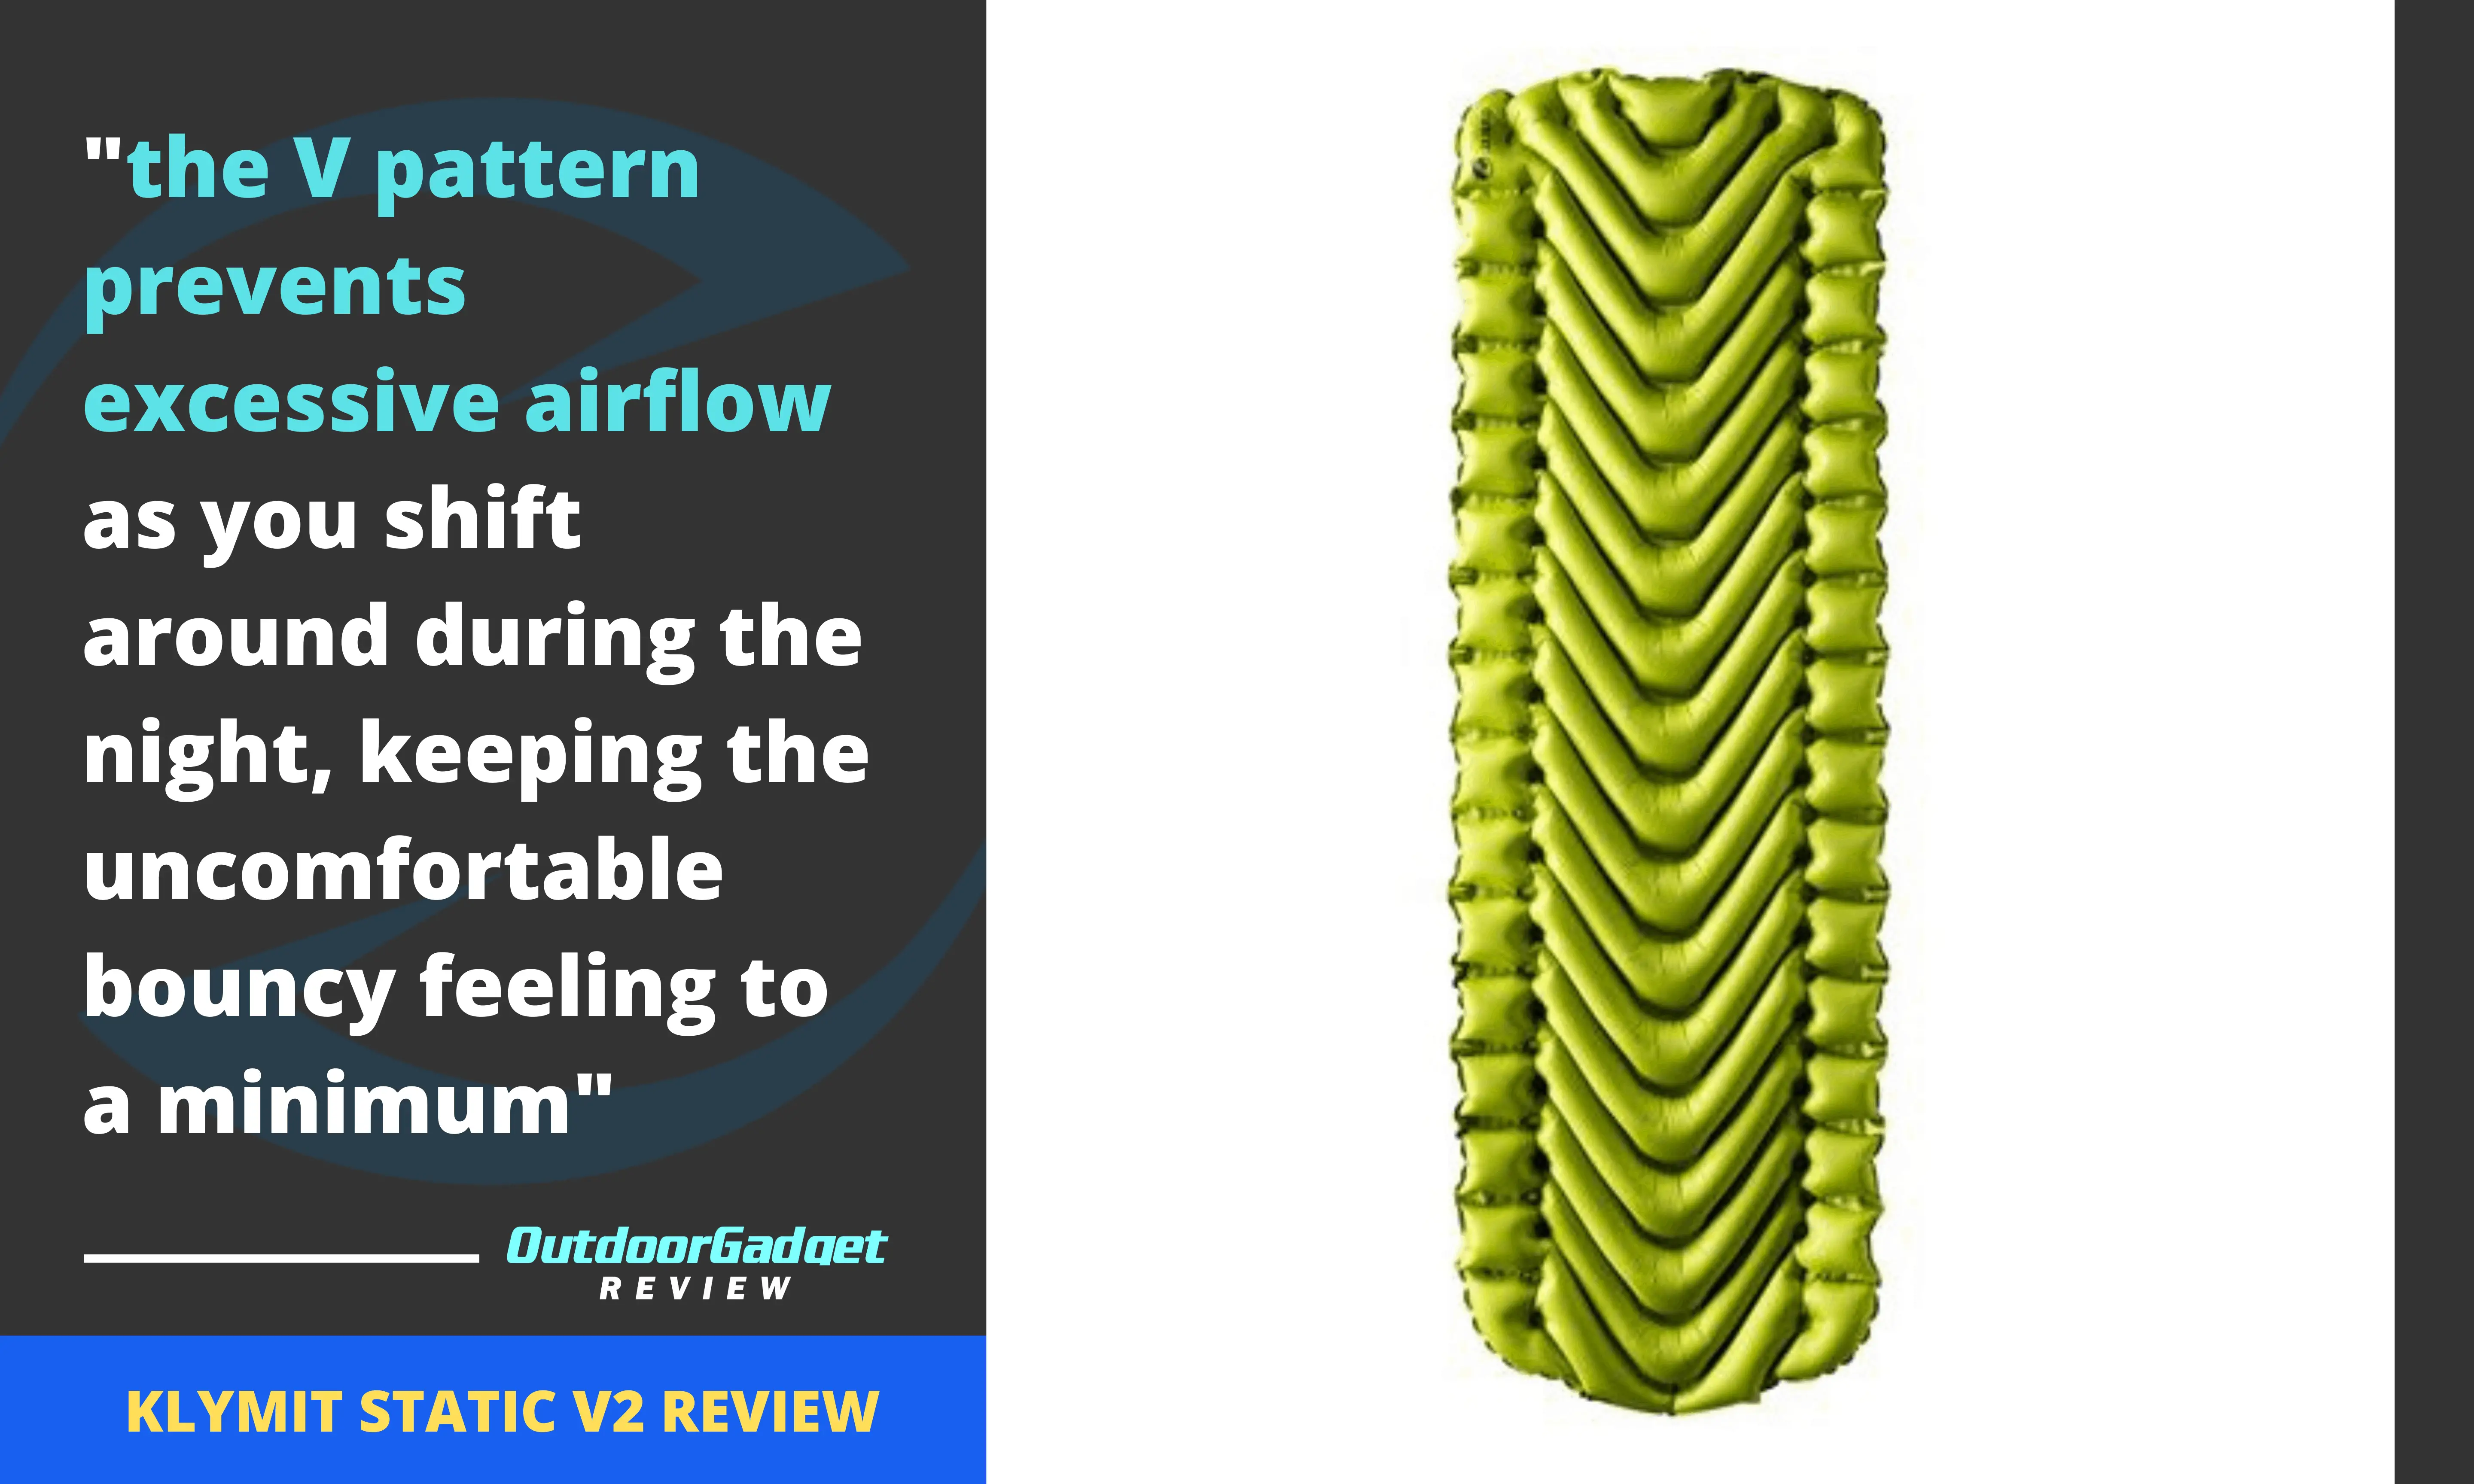 the V pattern prevents excessive airflow as you shift around during the night, keeping the uncomfortable bouncy feeling to a minimum